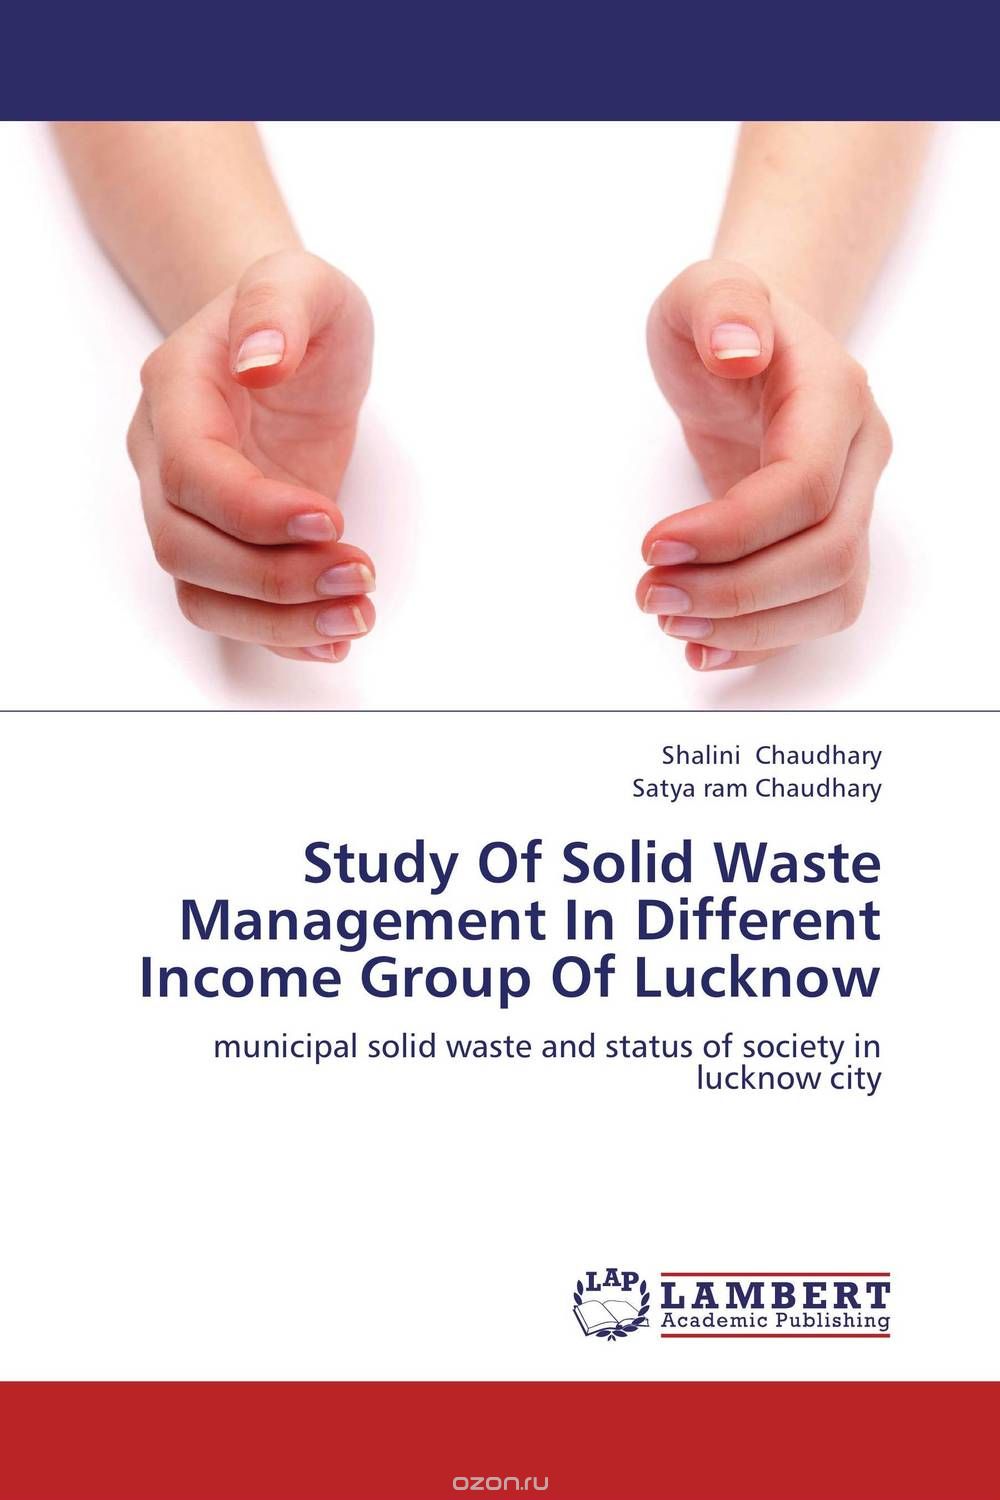 Скачать книгу "Study Of Solid Waste Management In Different Income Group Of Lucknow"